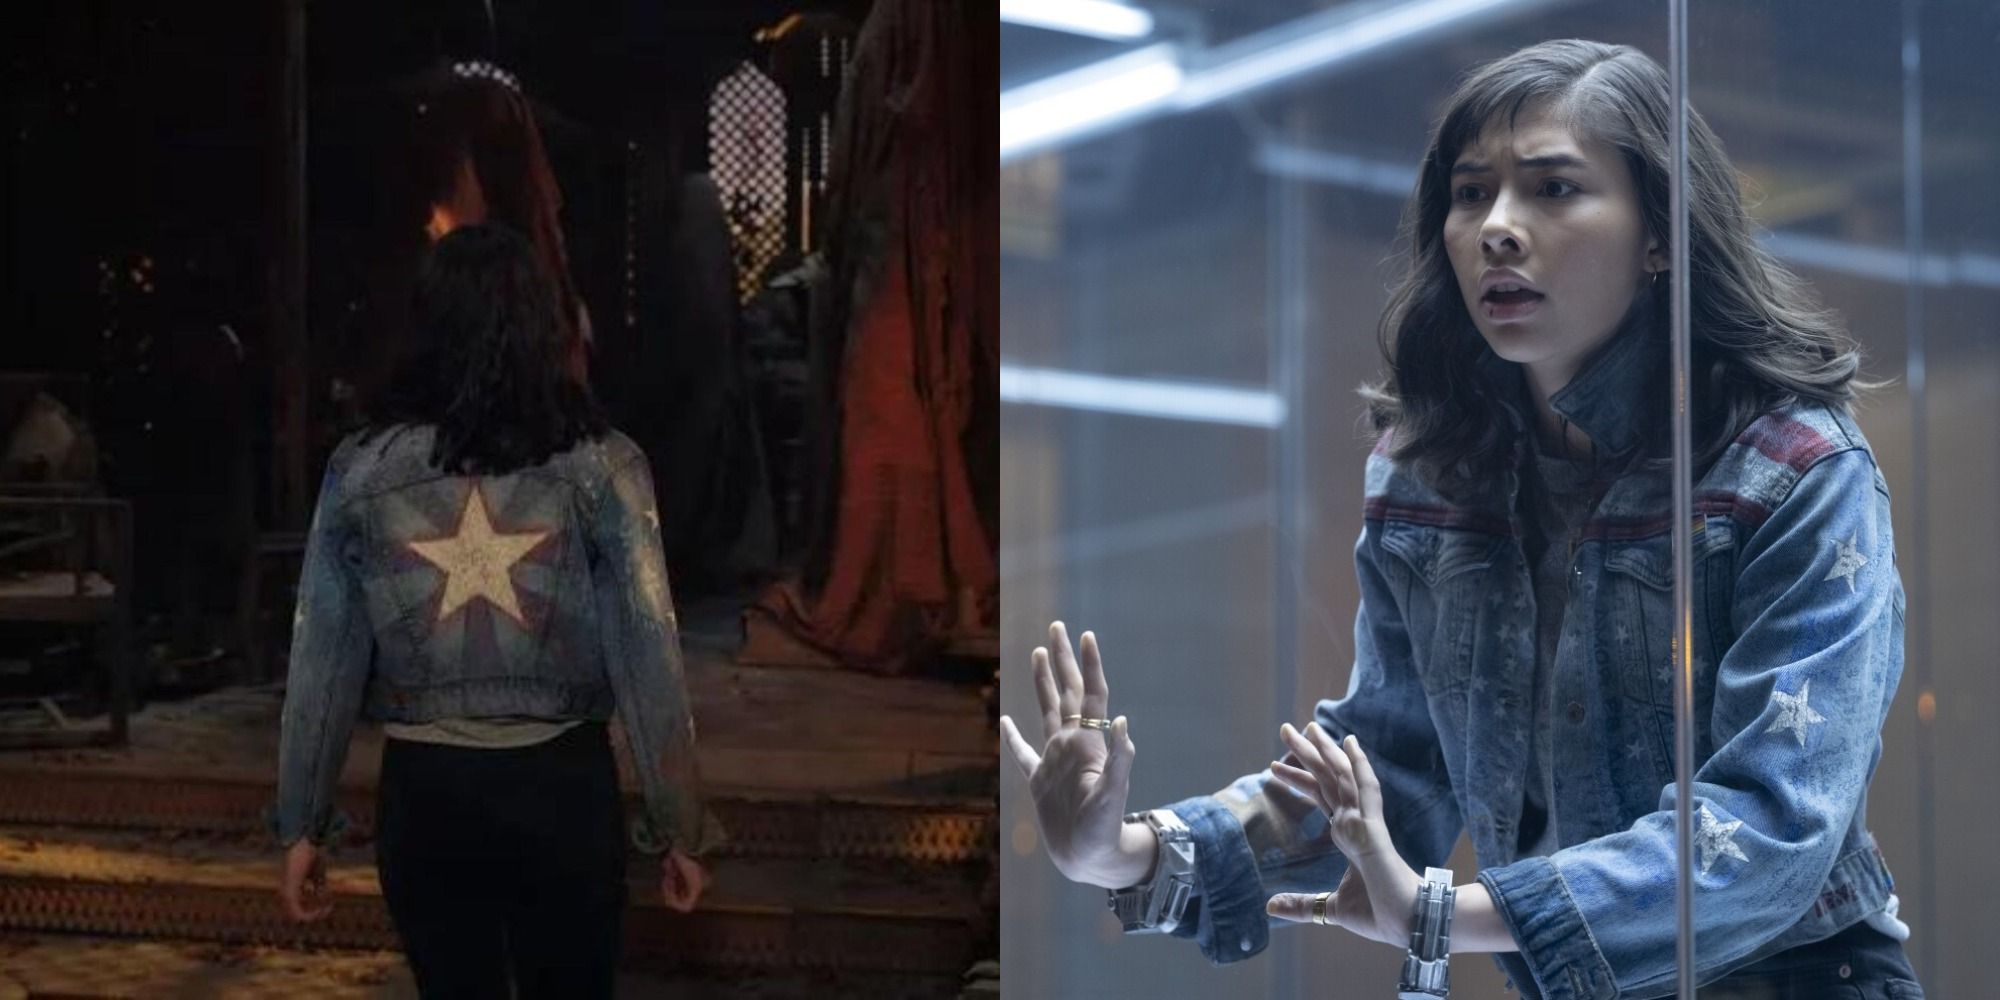 Split image of America Chavez from behind and behind a glass